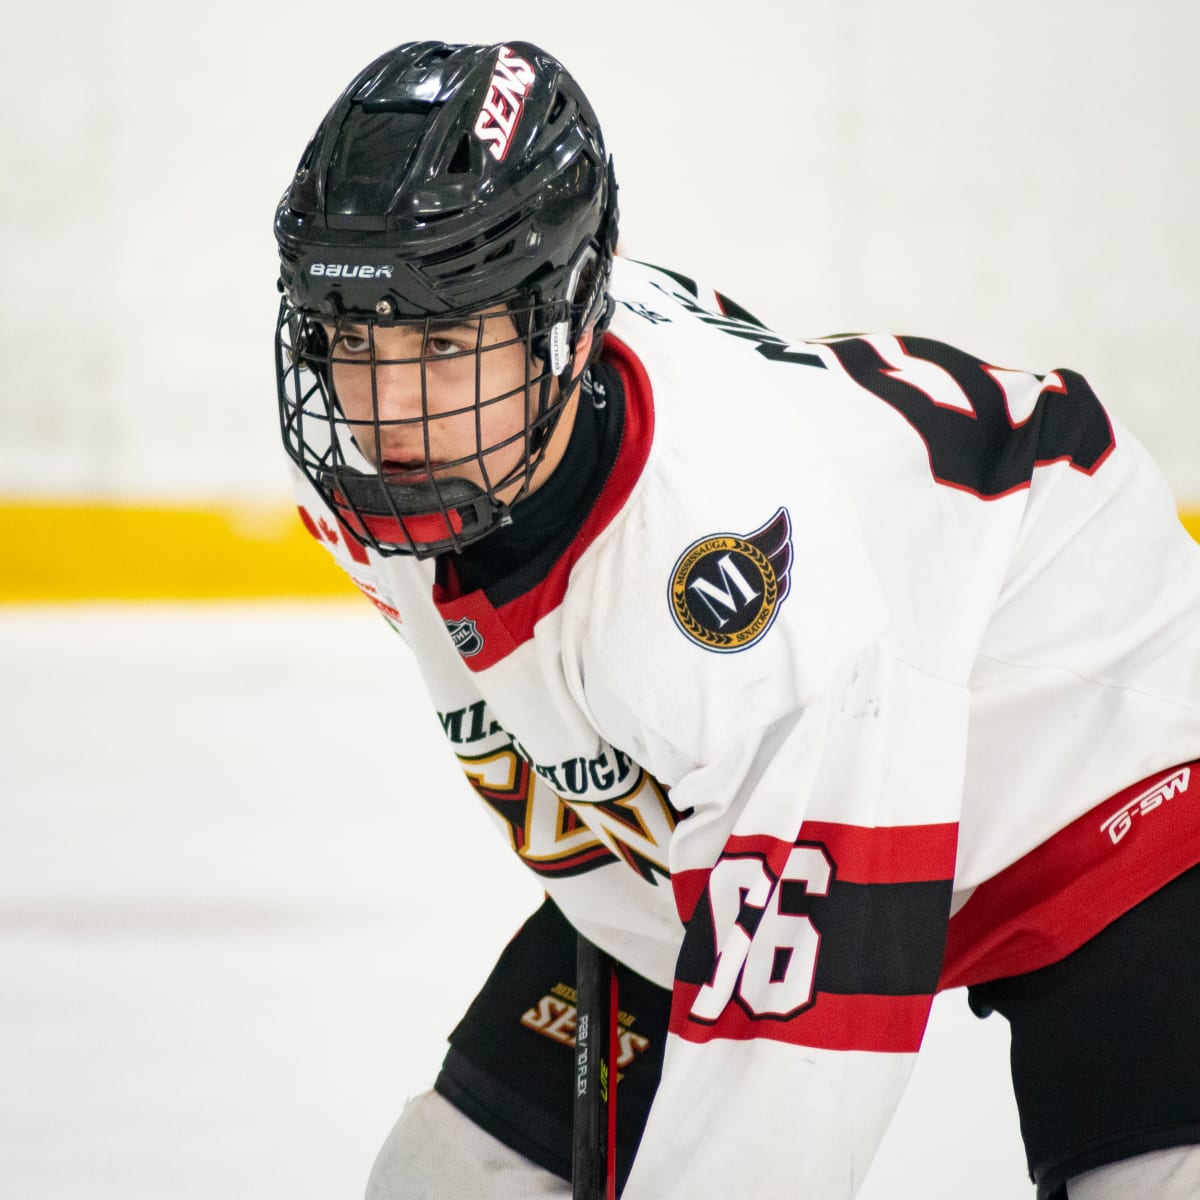 Building a prodigy: How Jack Hughes' blend of skill and